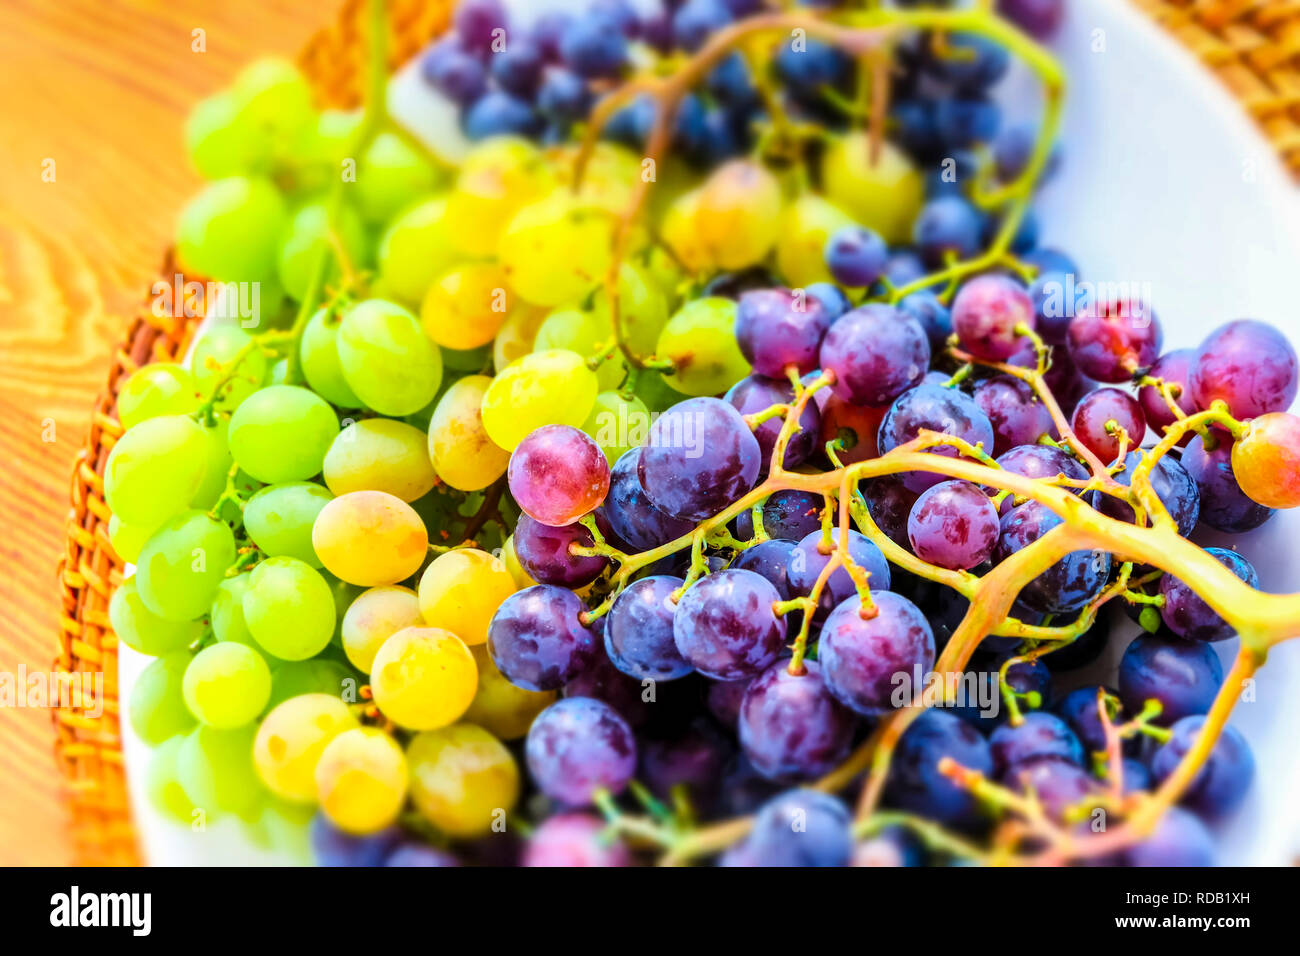 Plate of grapes Stock Photo